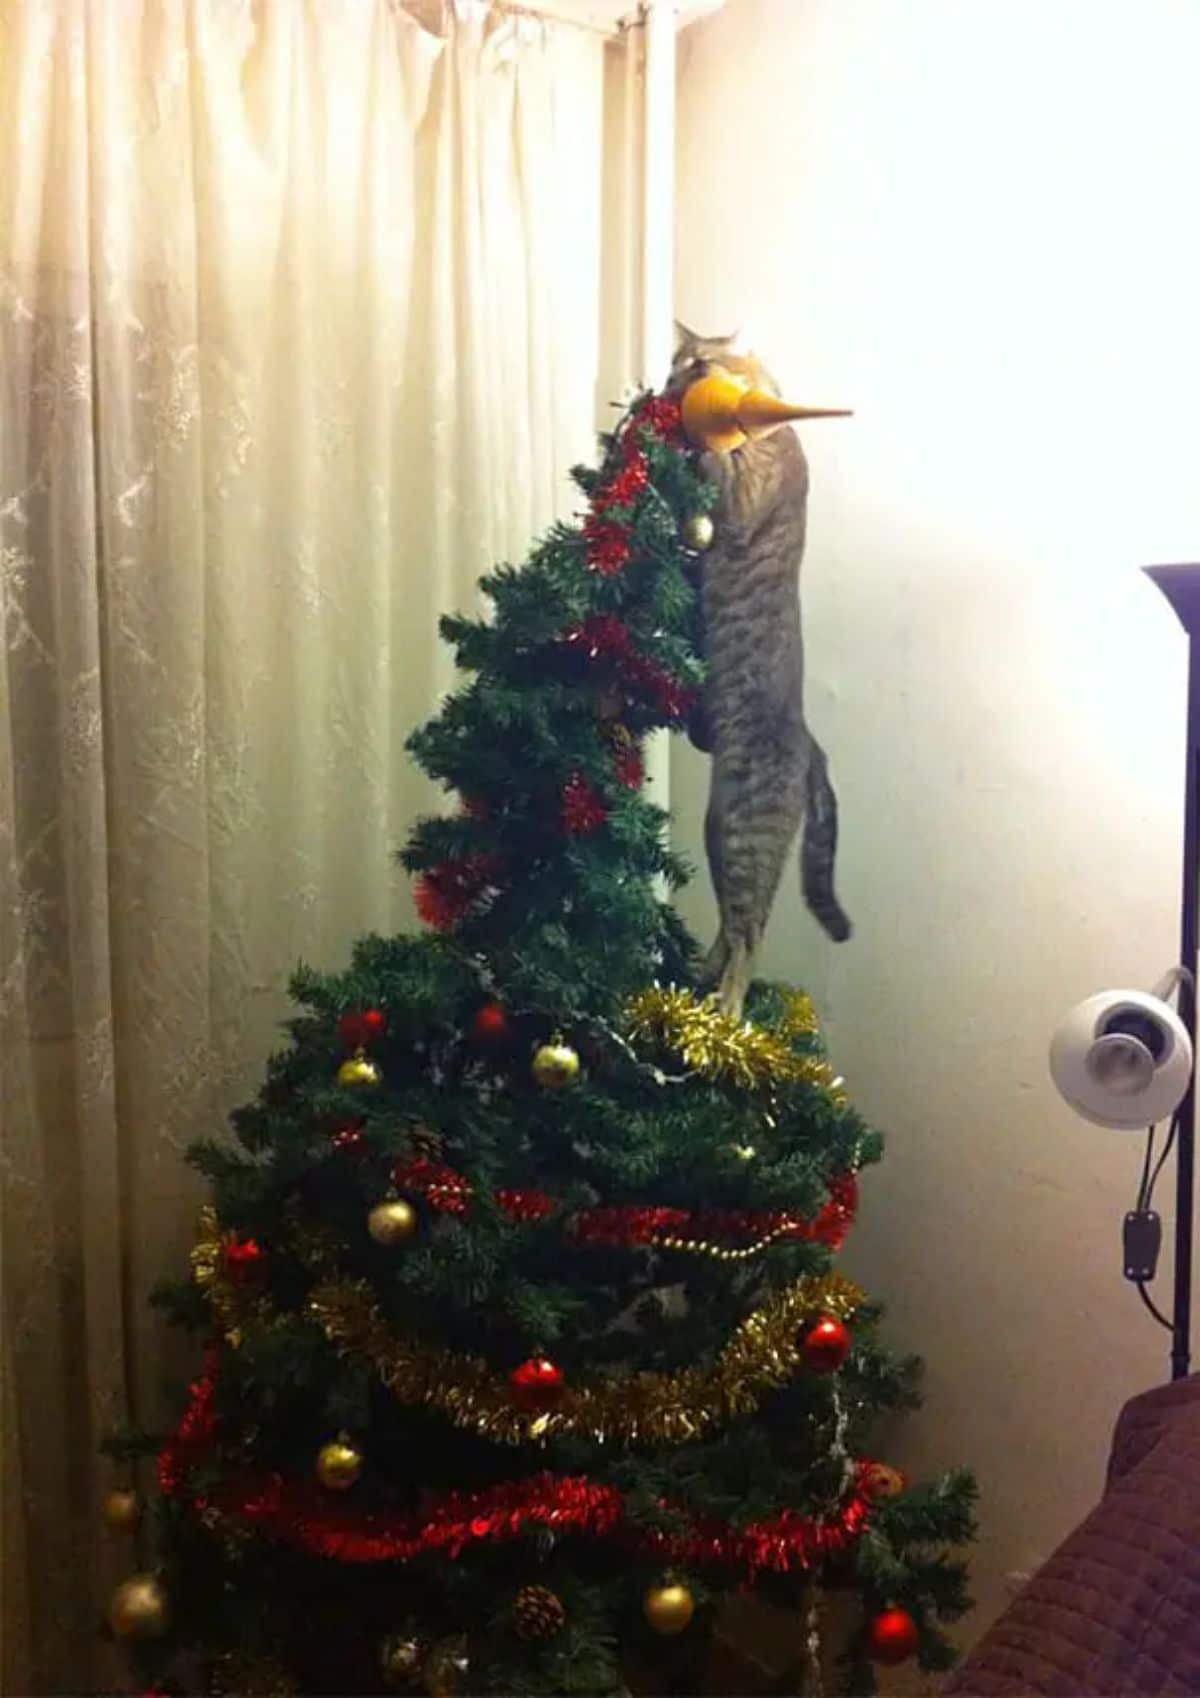 grey tabby cat climbing a christmas tree and pulling down the top towards it